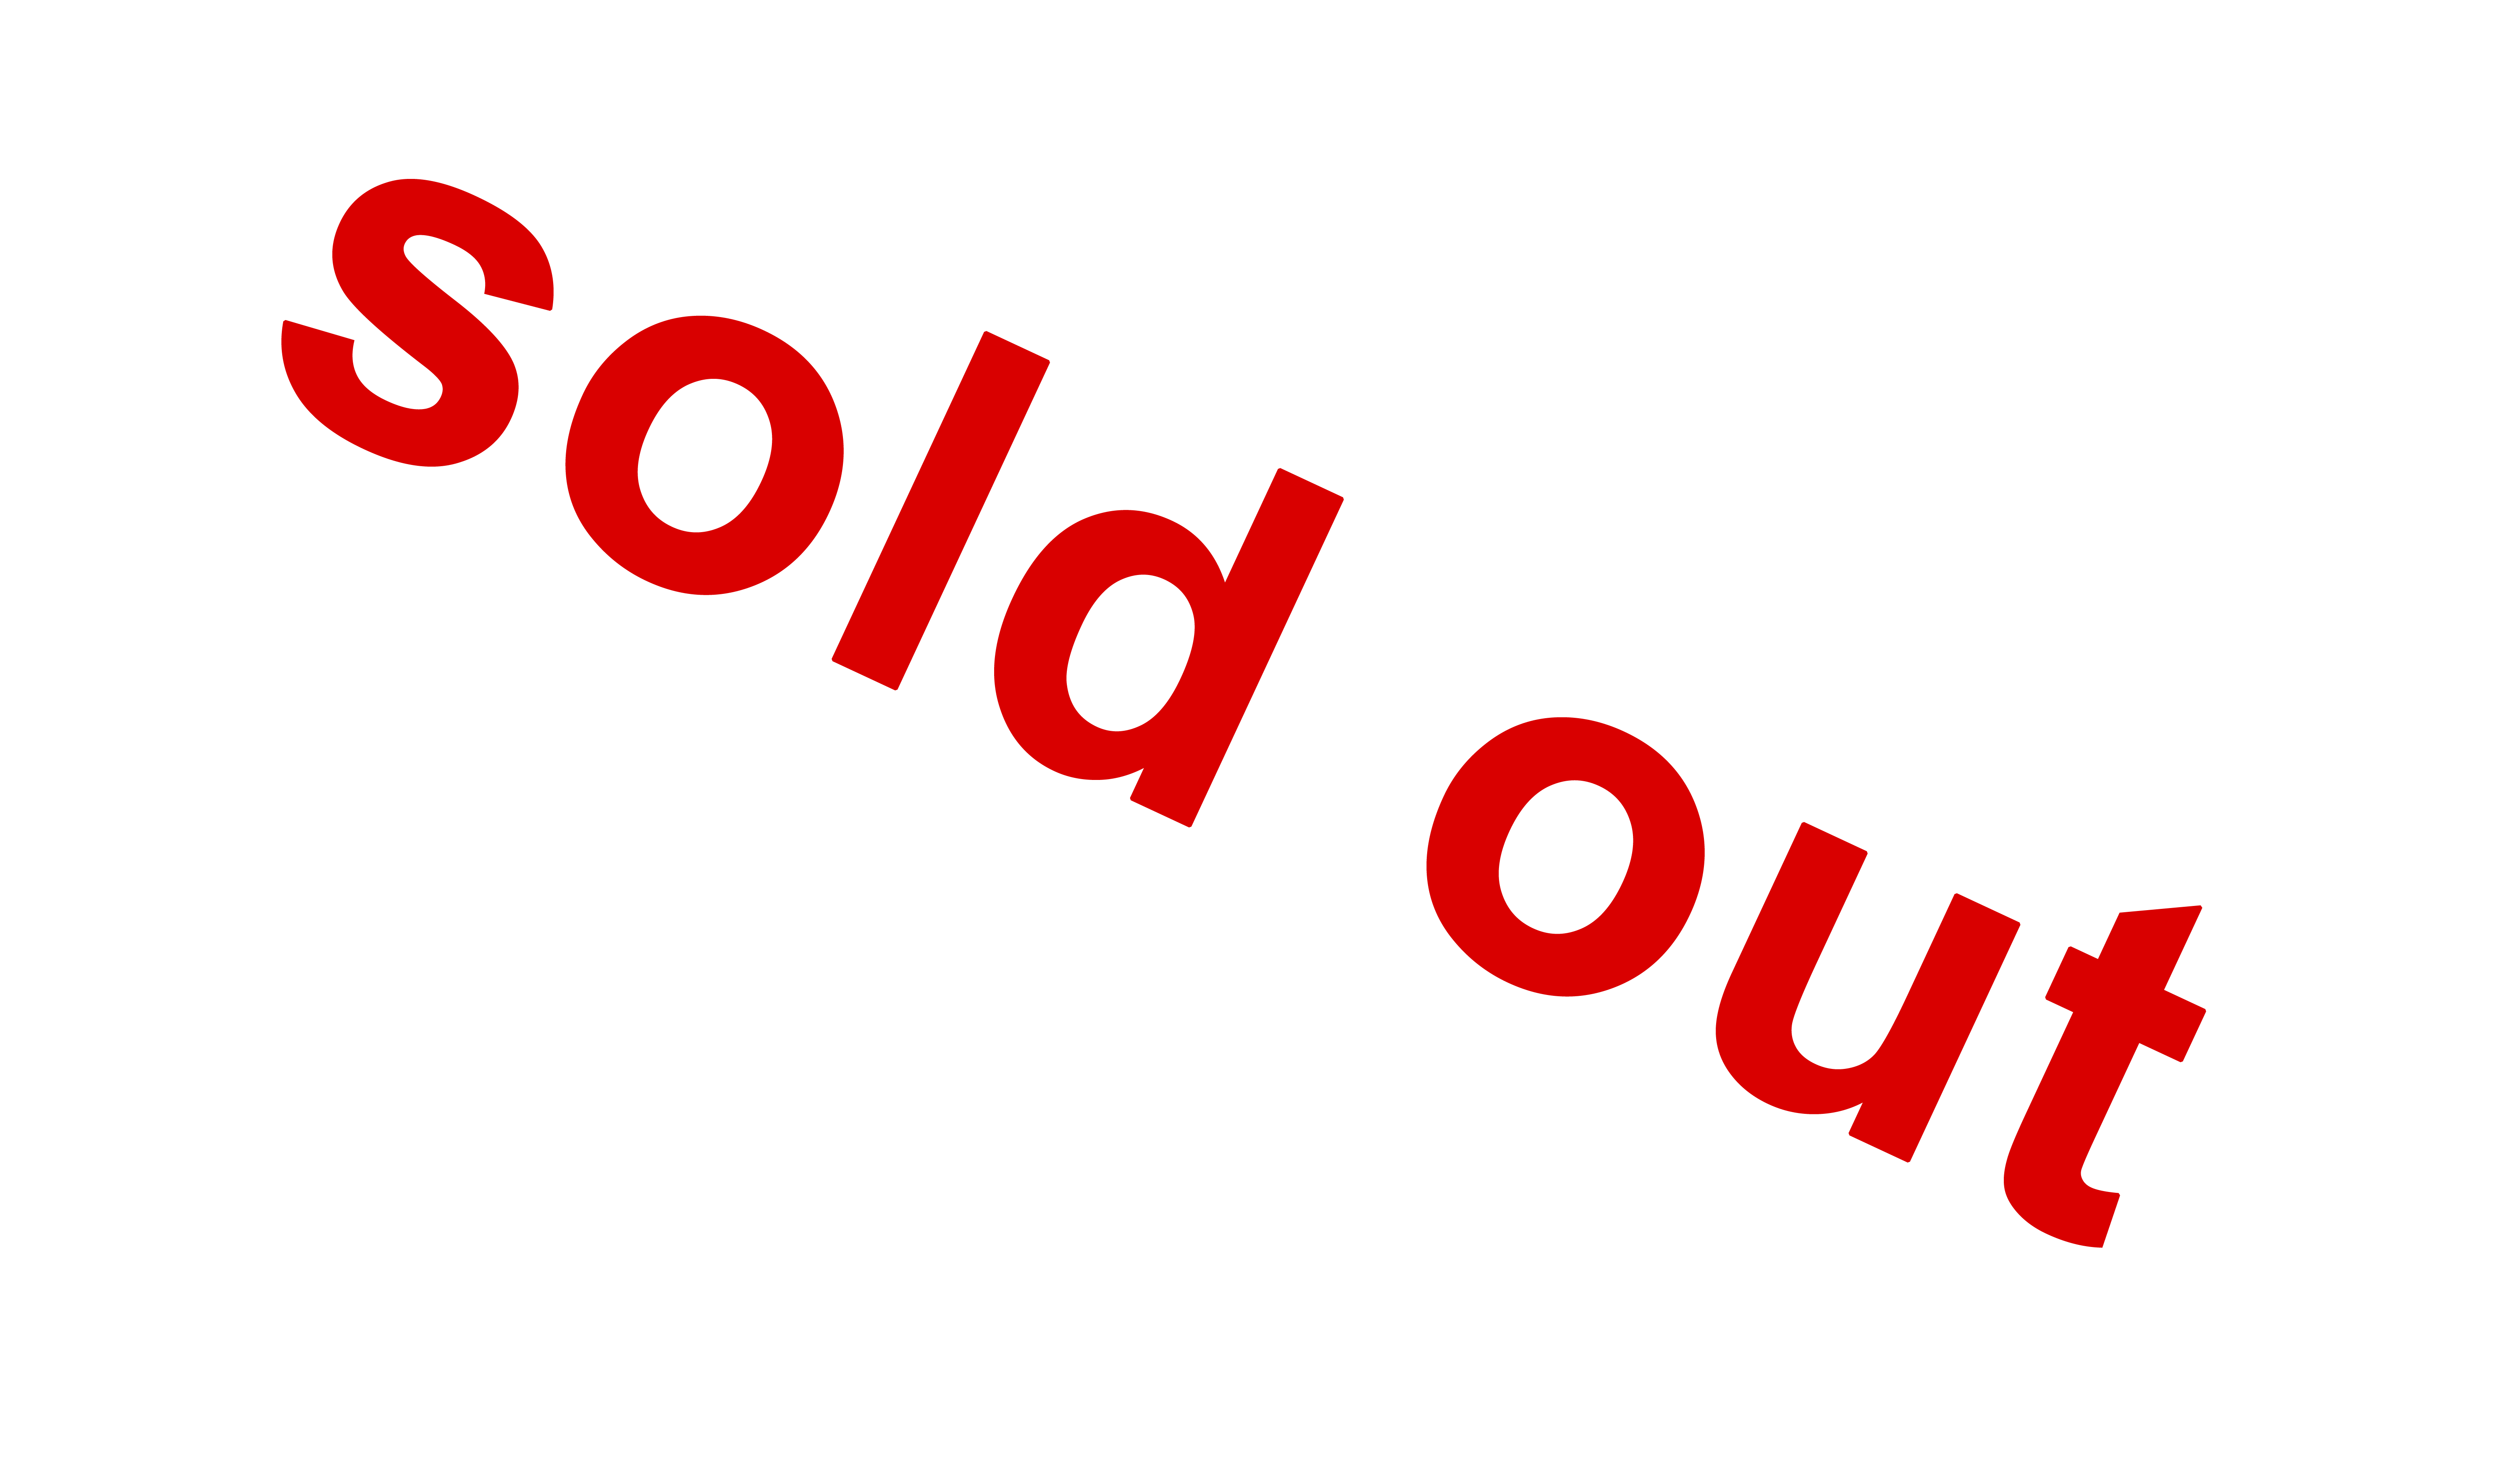 Sold Out Download Free PNG